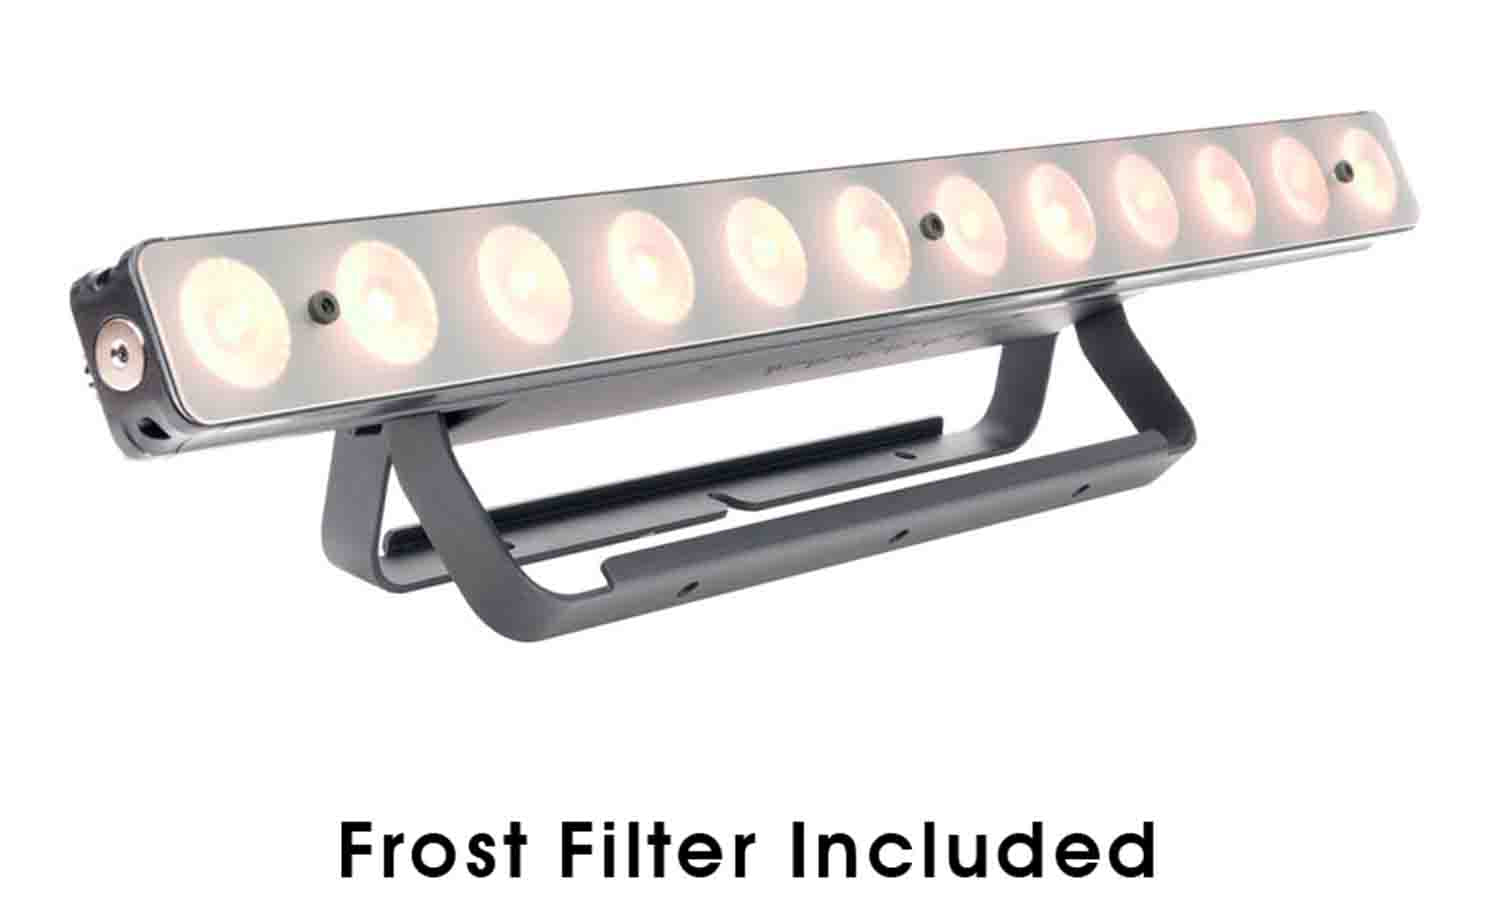 Elation DTW392 DTW BAR 1000 12 x 10W Multi-Chip Cool White/Warm White/Amber LEDs - Hollywood DJ